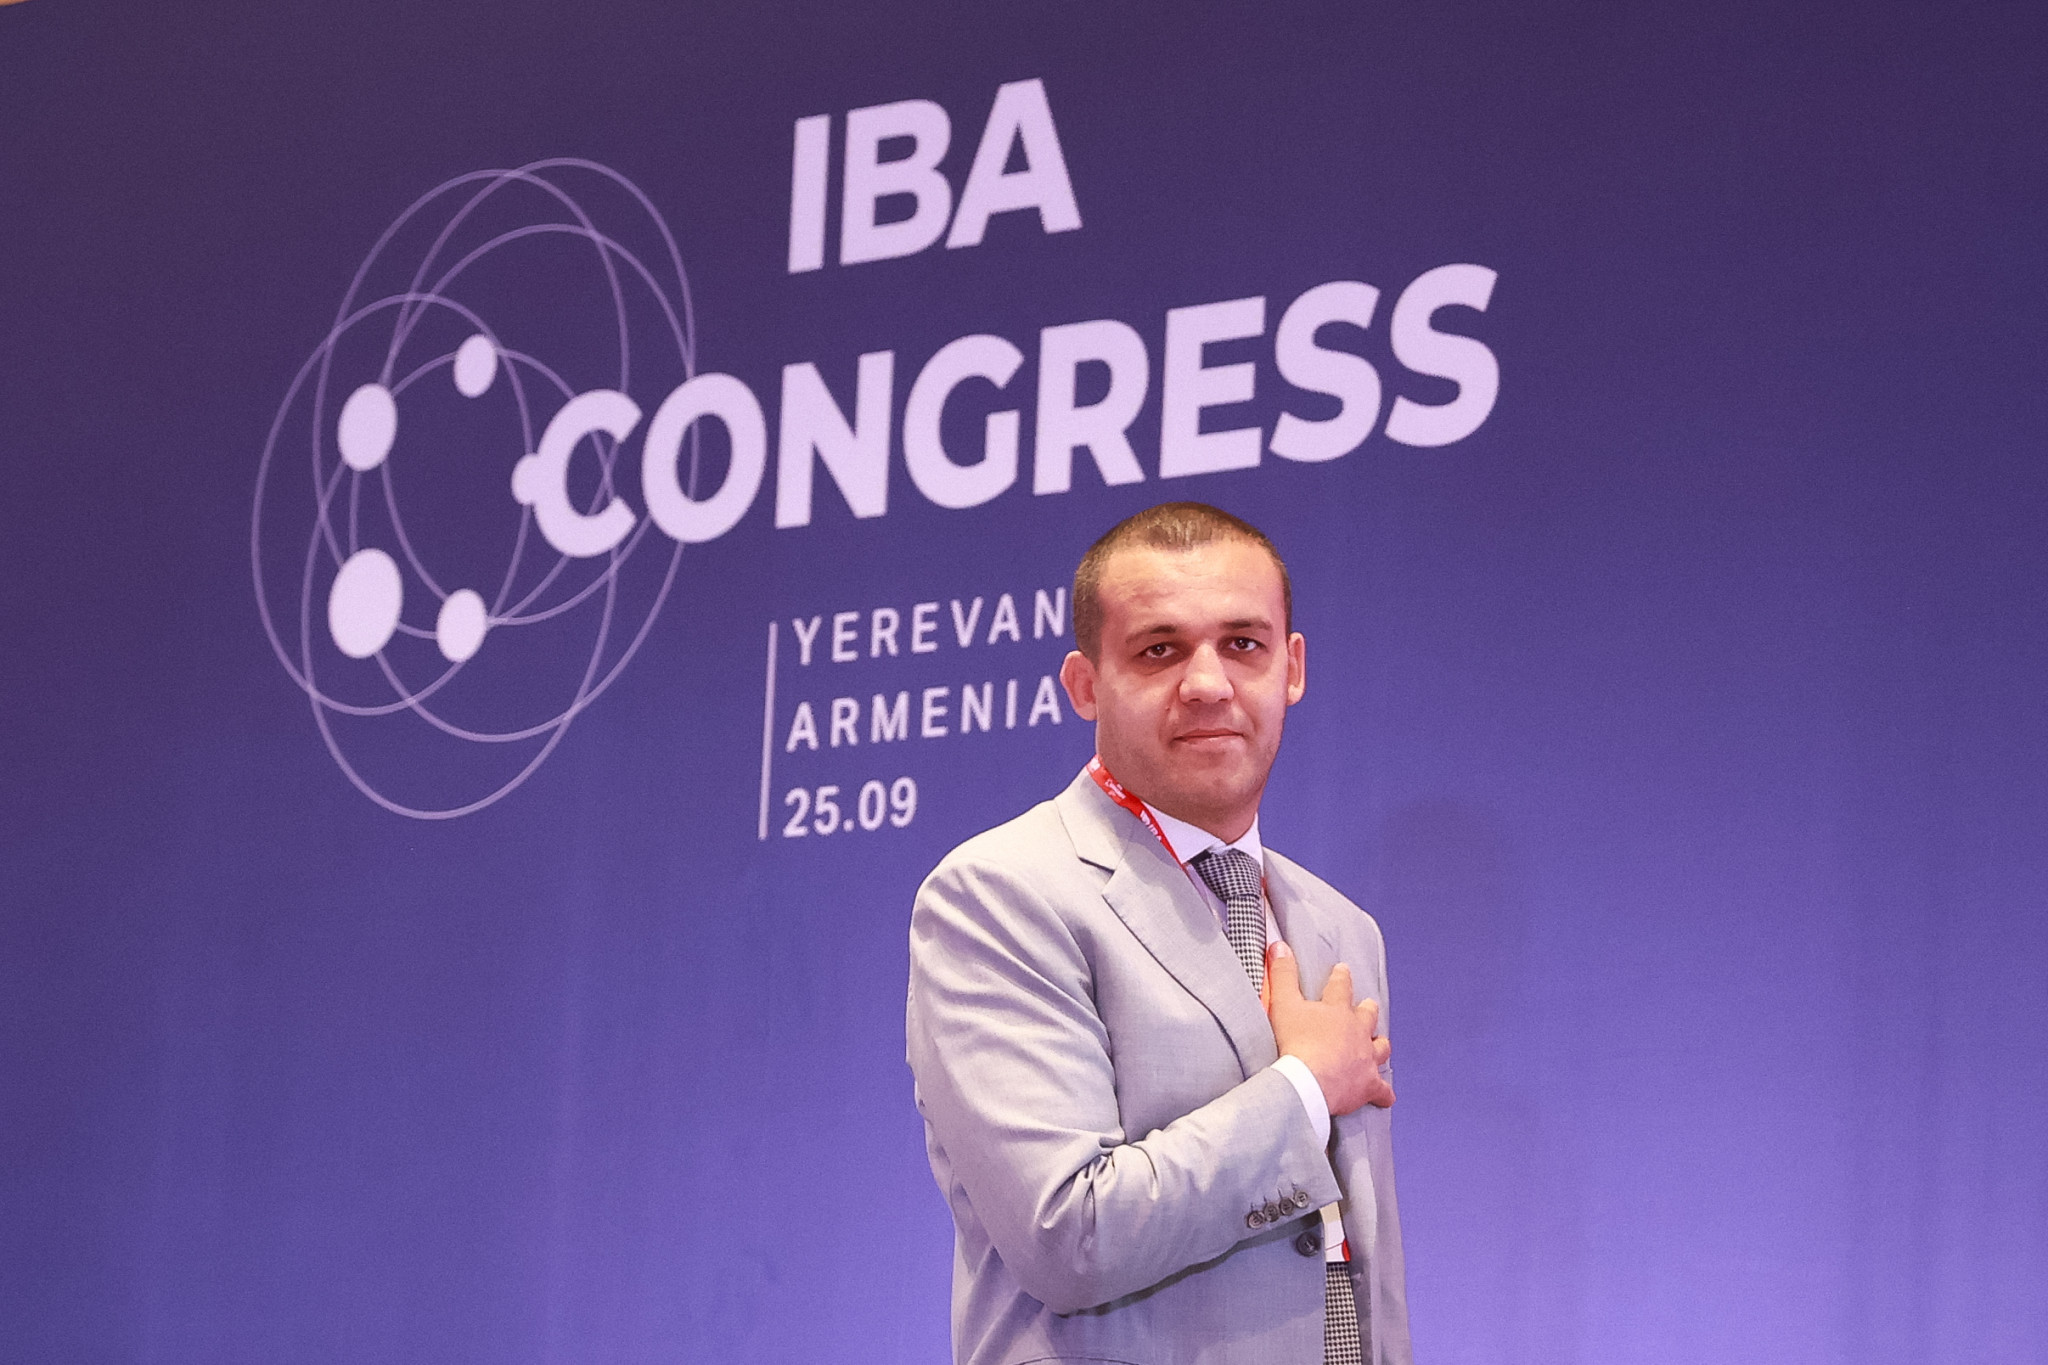 The International Boxing Association appears to have cleaned up its act under President Umar Kremlev, our columnist argues ©IBA